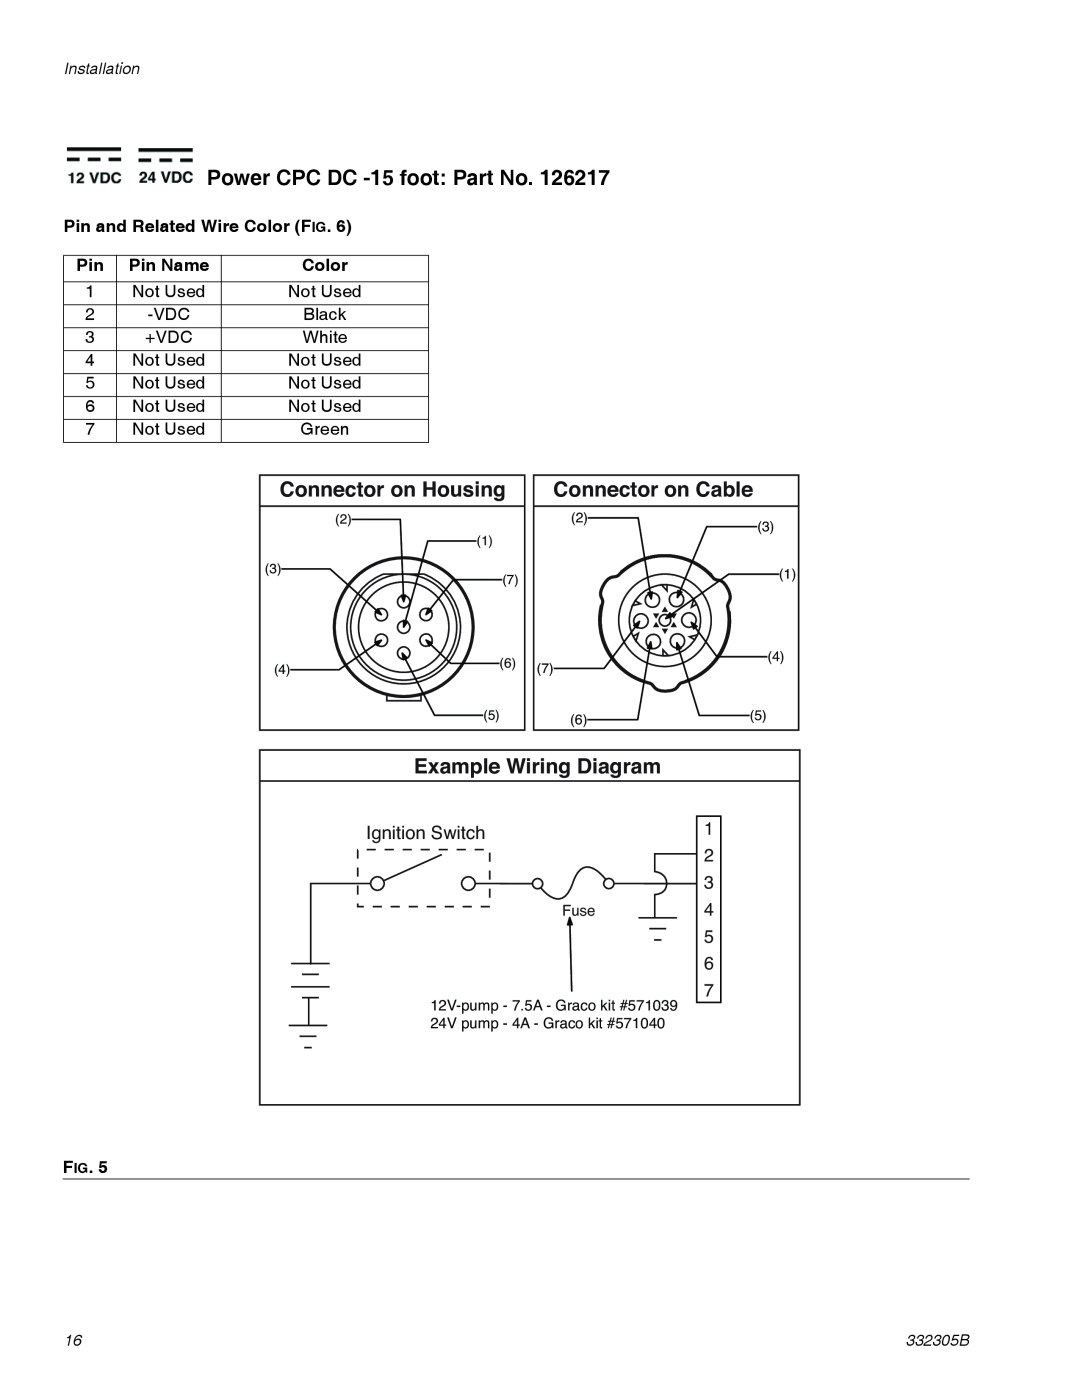 Graco 332305B Power CPC DC -15foot Part No, Connector on Housing, Connector on Cable, Example Wiring Diagram 